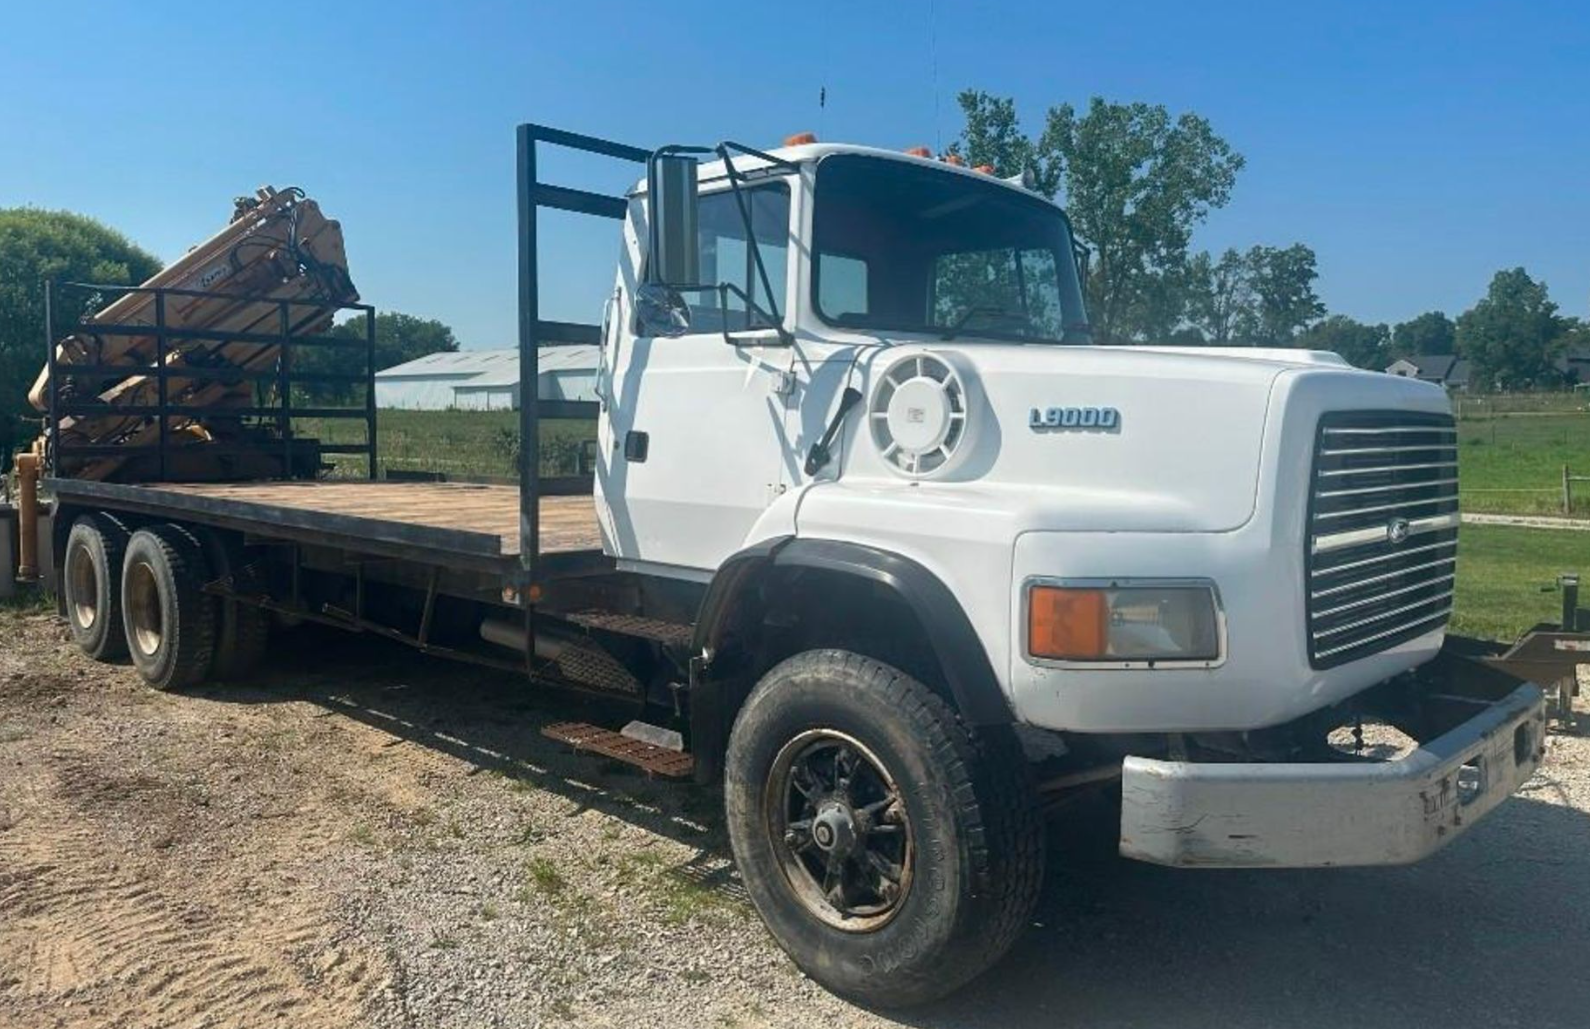 1996 Copma C 2330/3 on 1995 Ford L9000 Knuckle Boom Truck